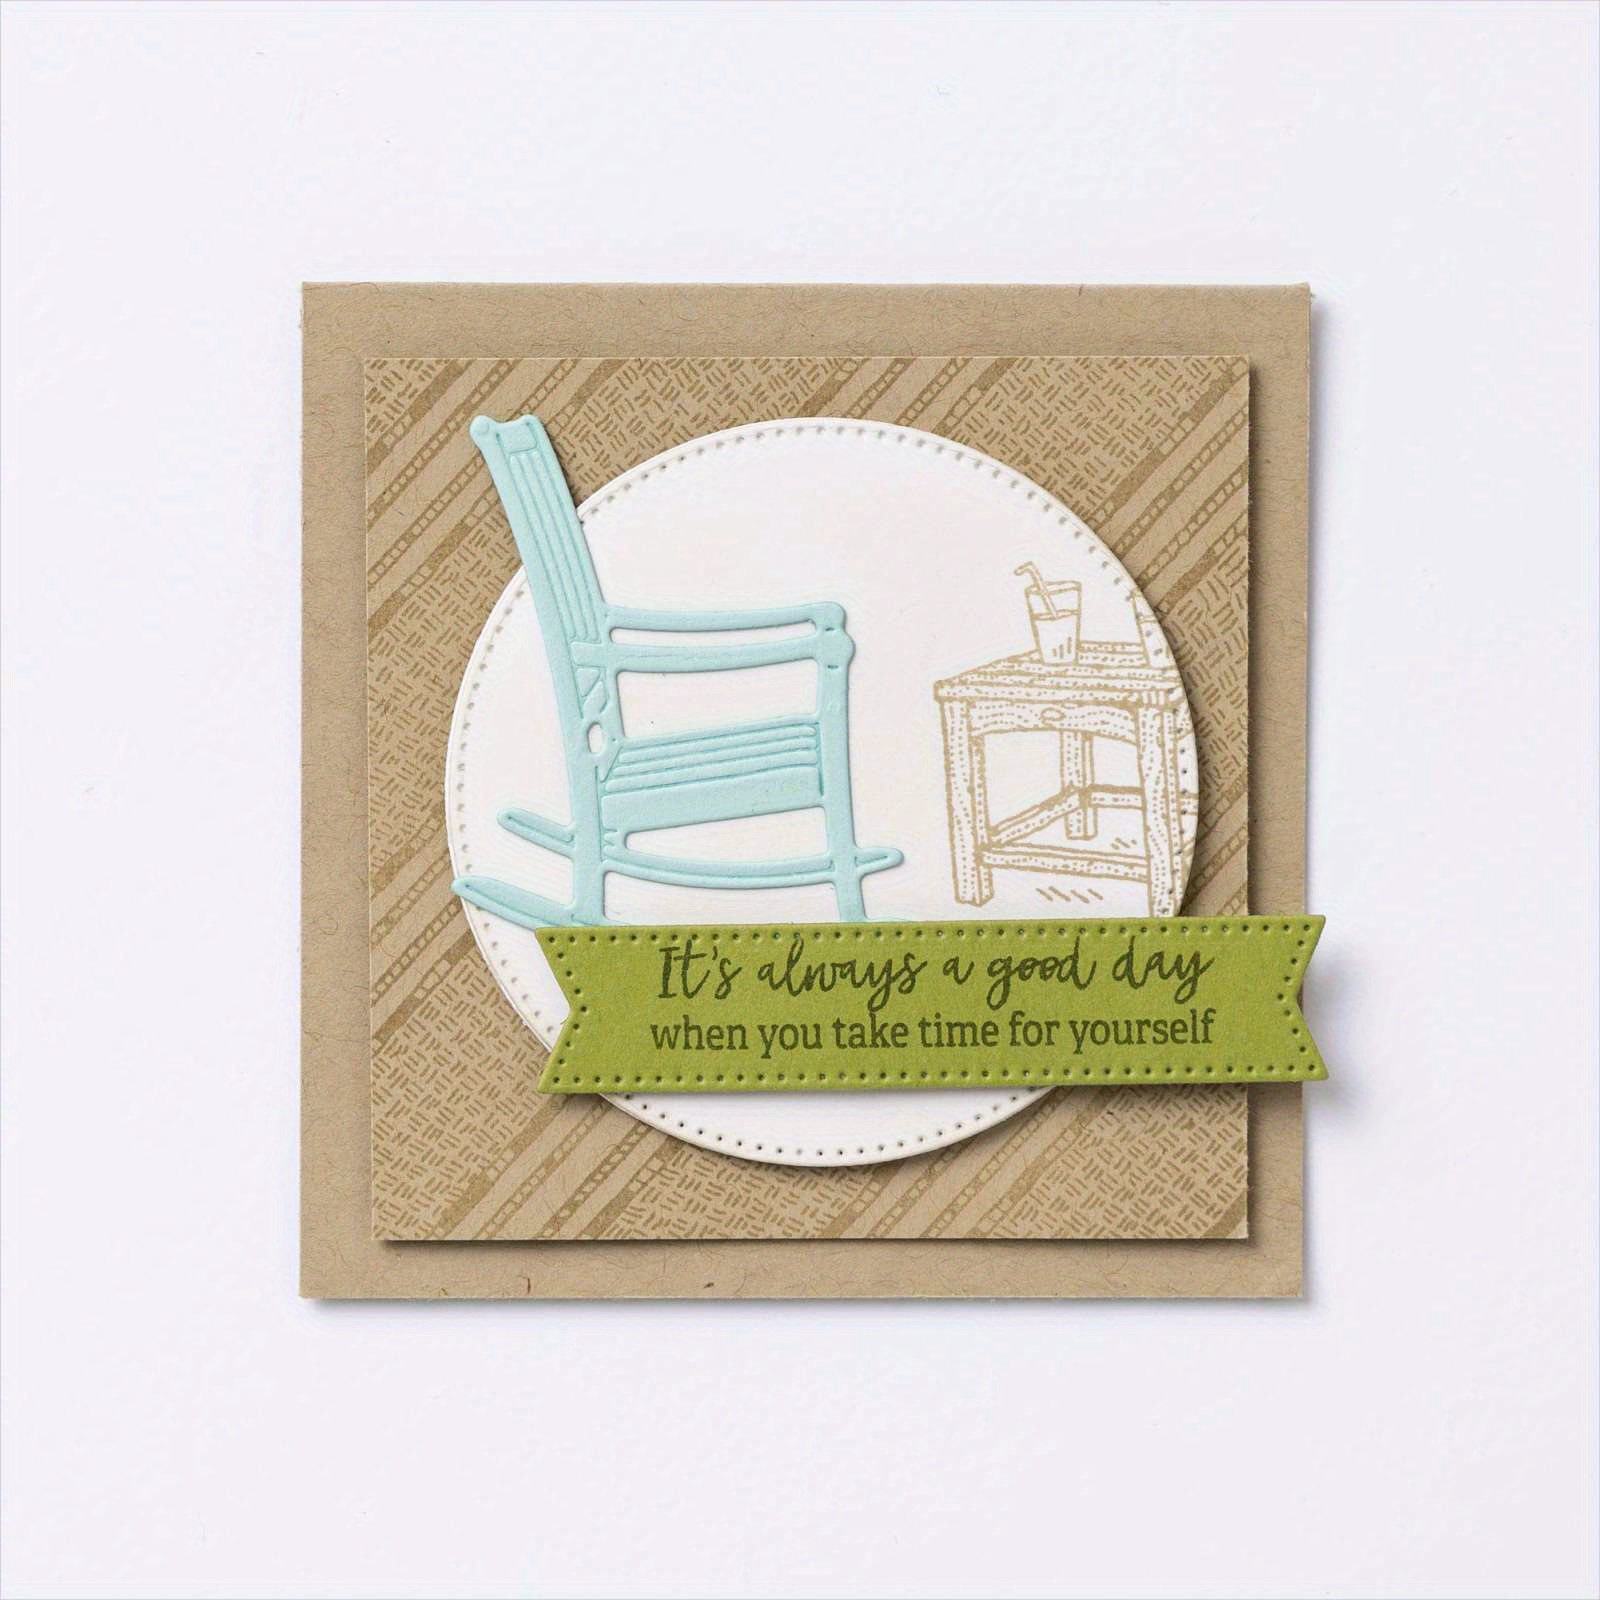 Lazy Days Clear Stamp and Cutting Dies for Card Making,diy Scrapbook Crafts